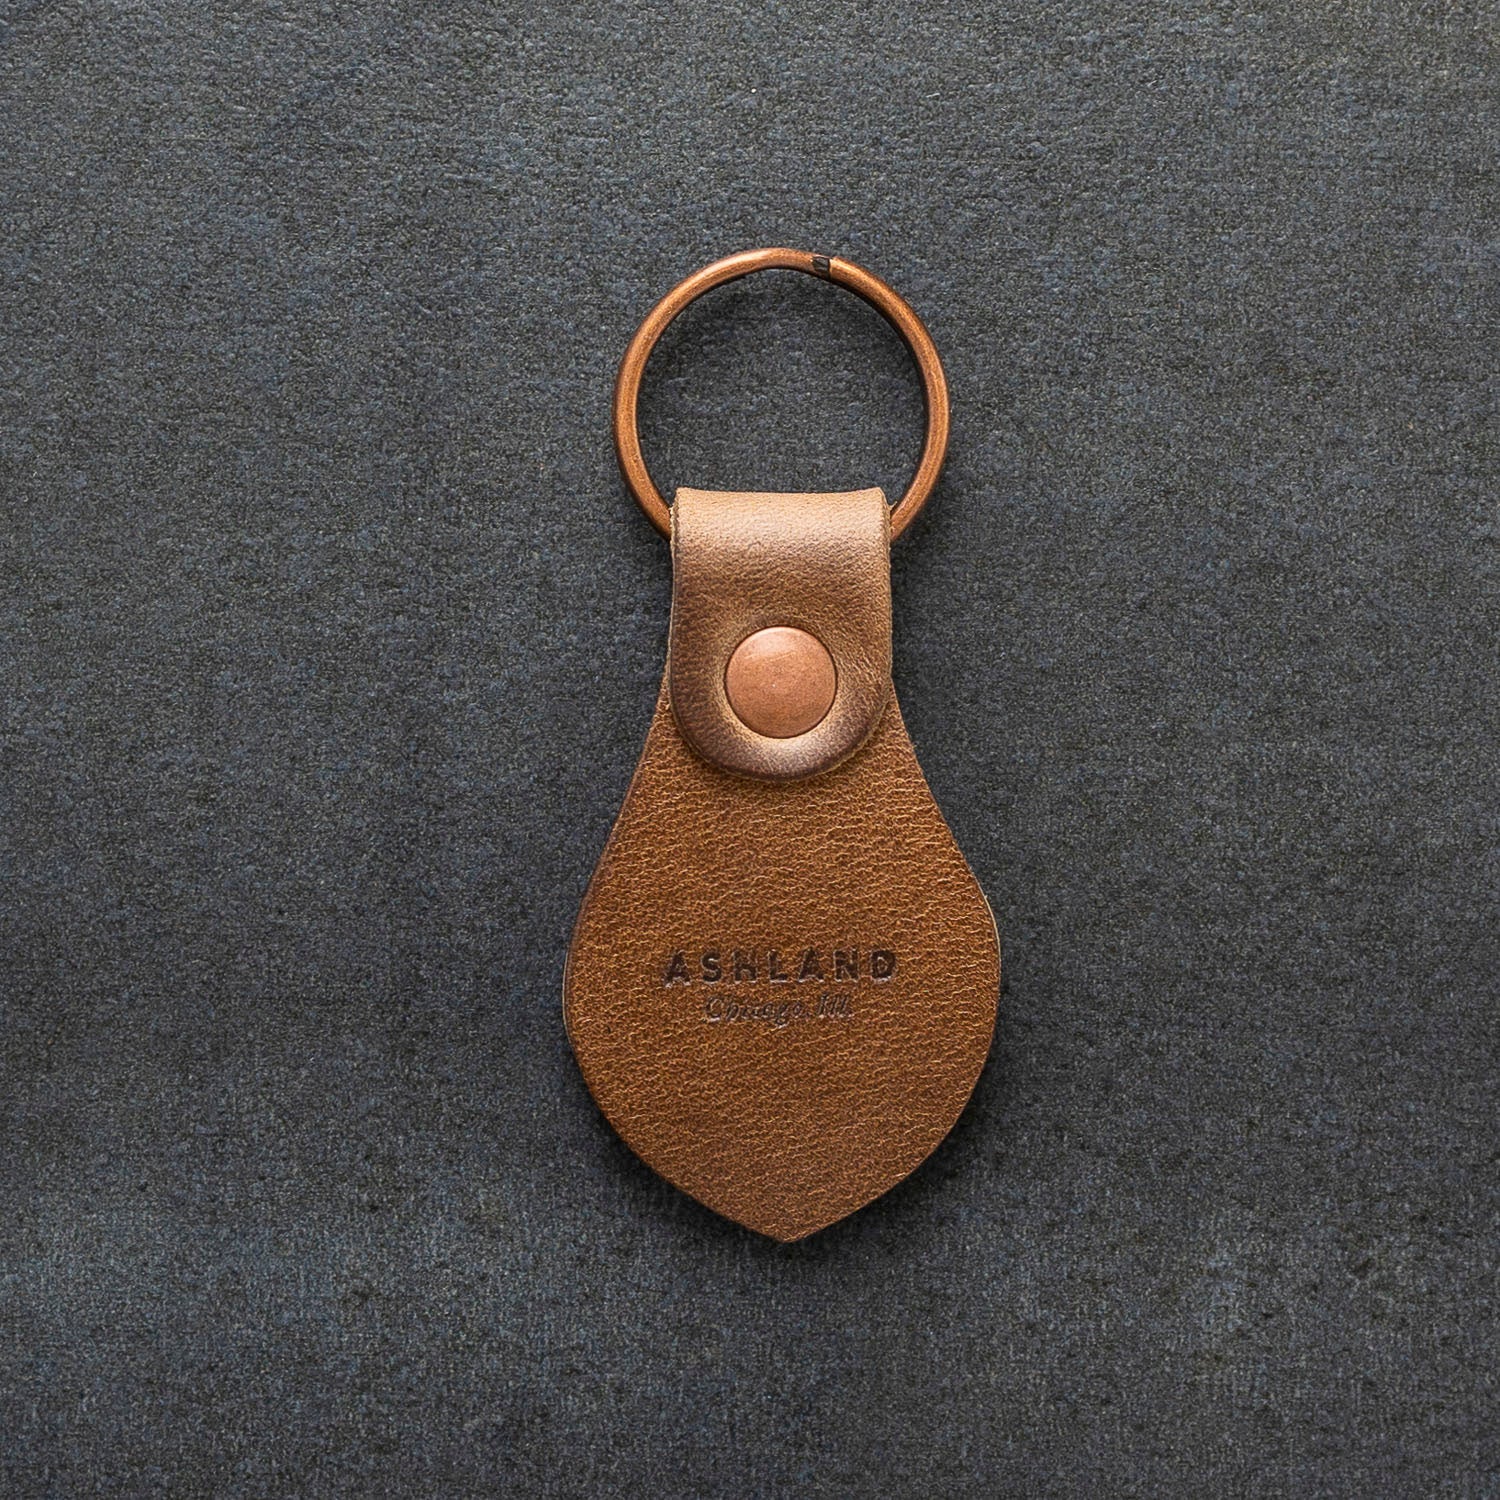 The Rivet Leather AirTag Keychain Case